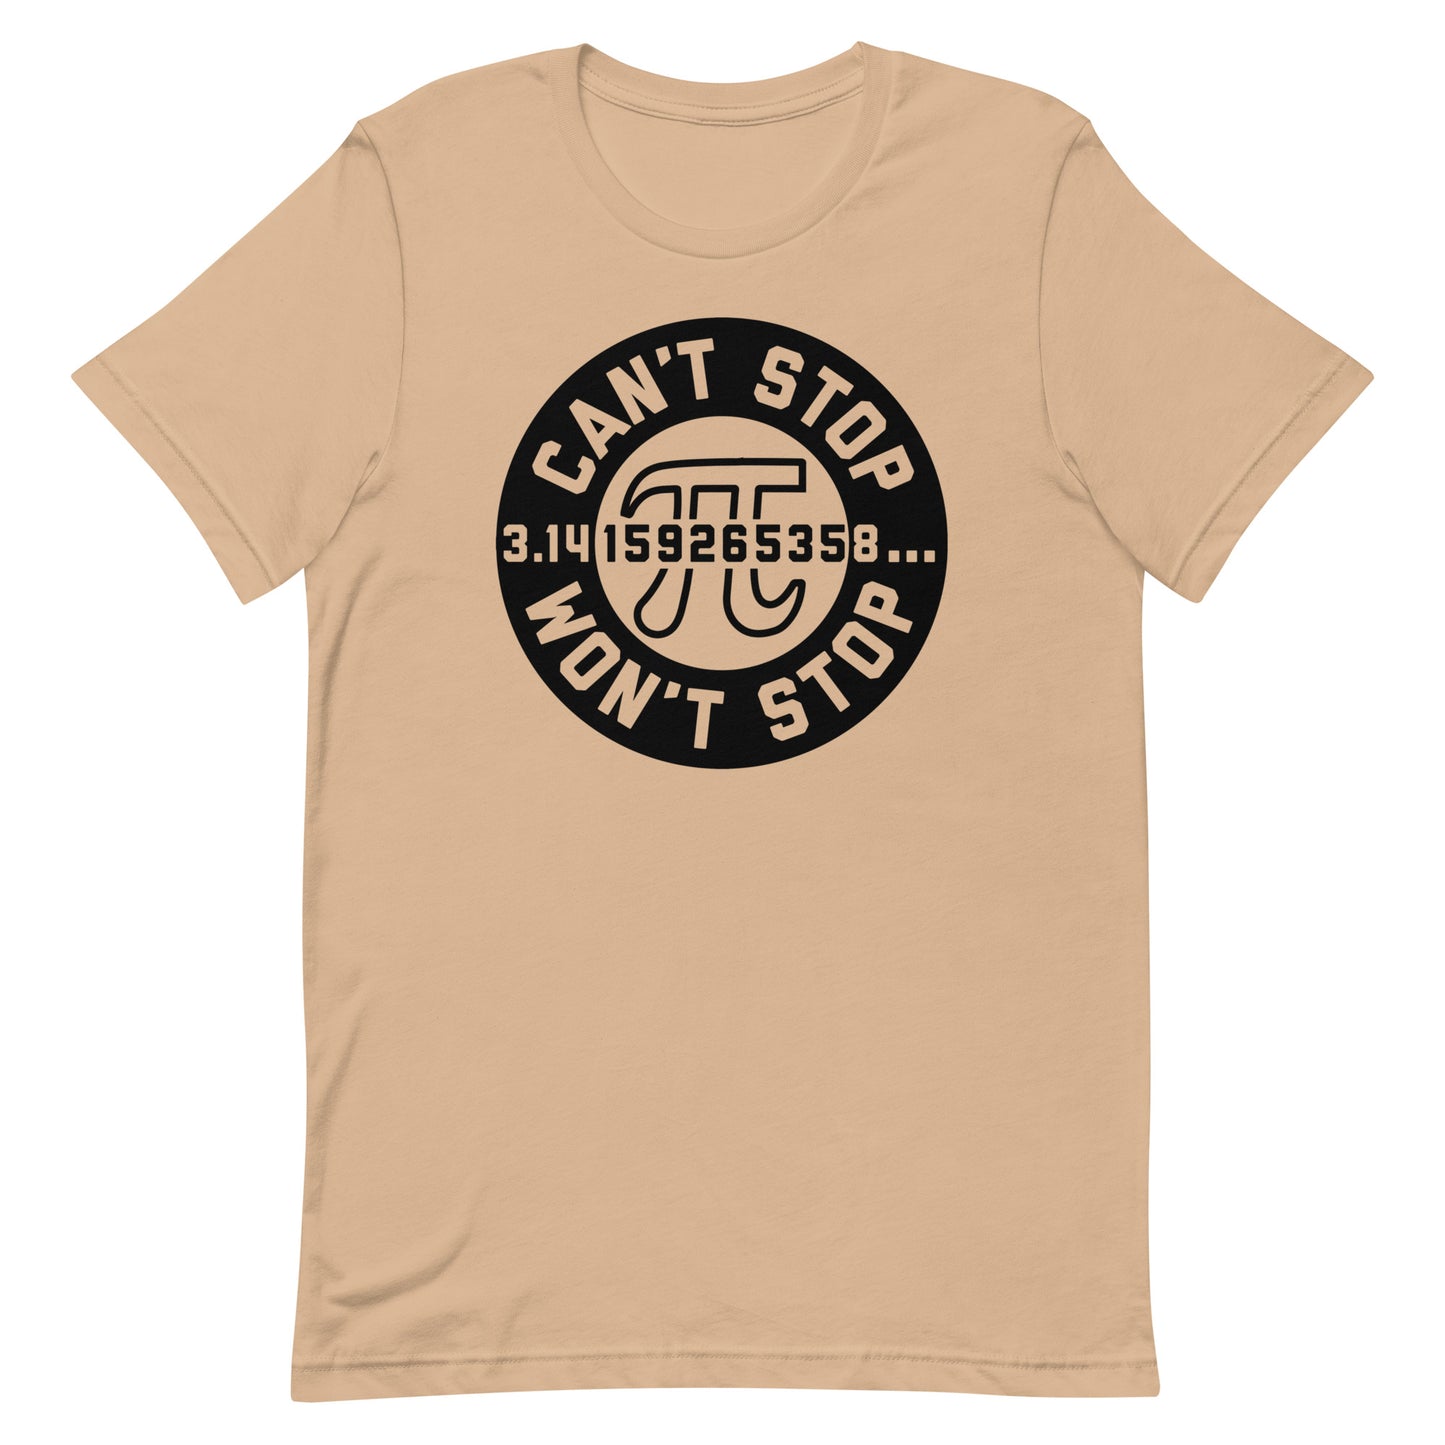 Can't Stop Won't Stop Men's Signature Tee